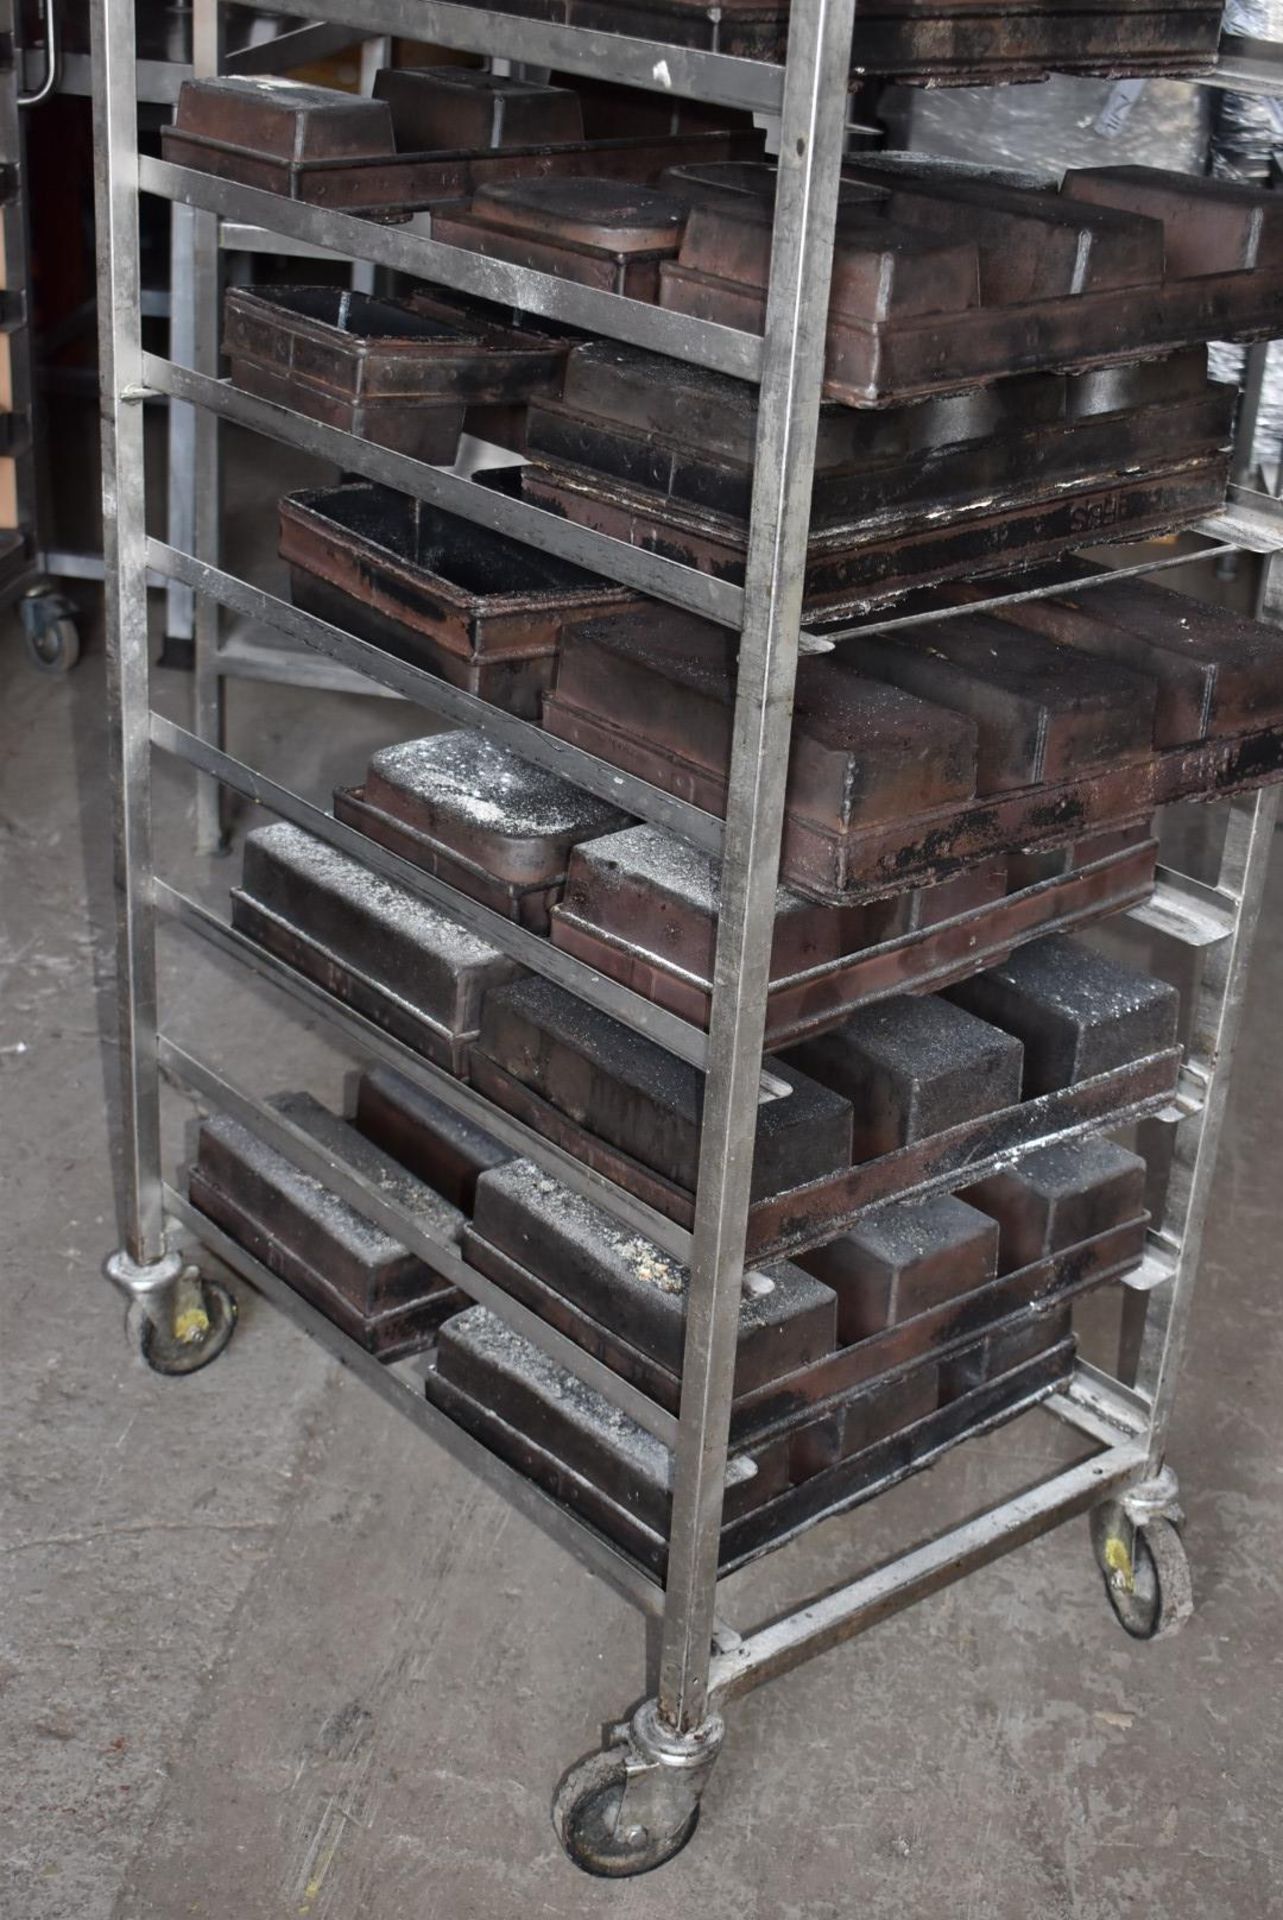 1 x Bakers Tray Rack With Various Pie Baking Trays - Stainless Steel With Castors - Recently Removed - Image 3 of 6